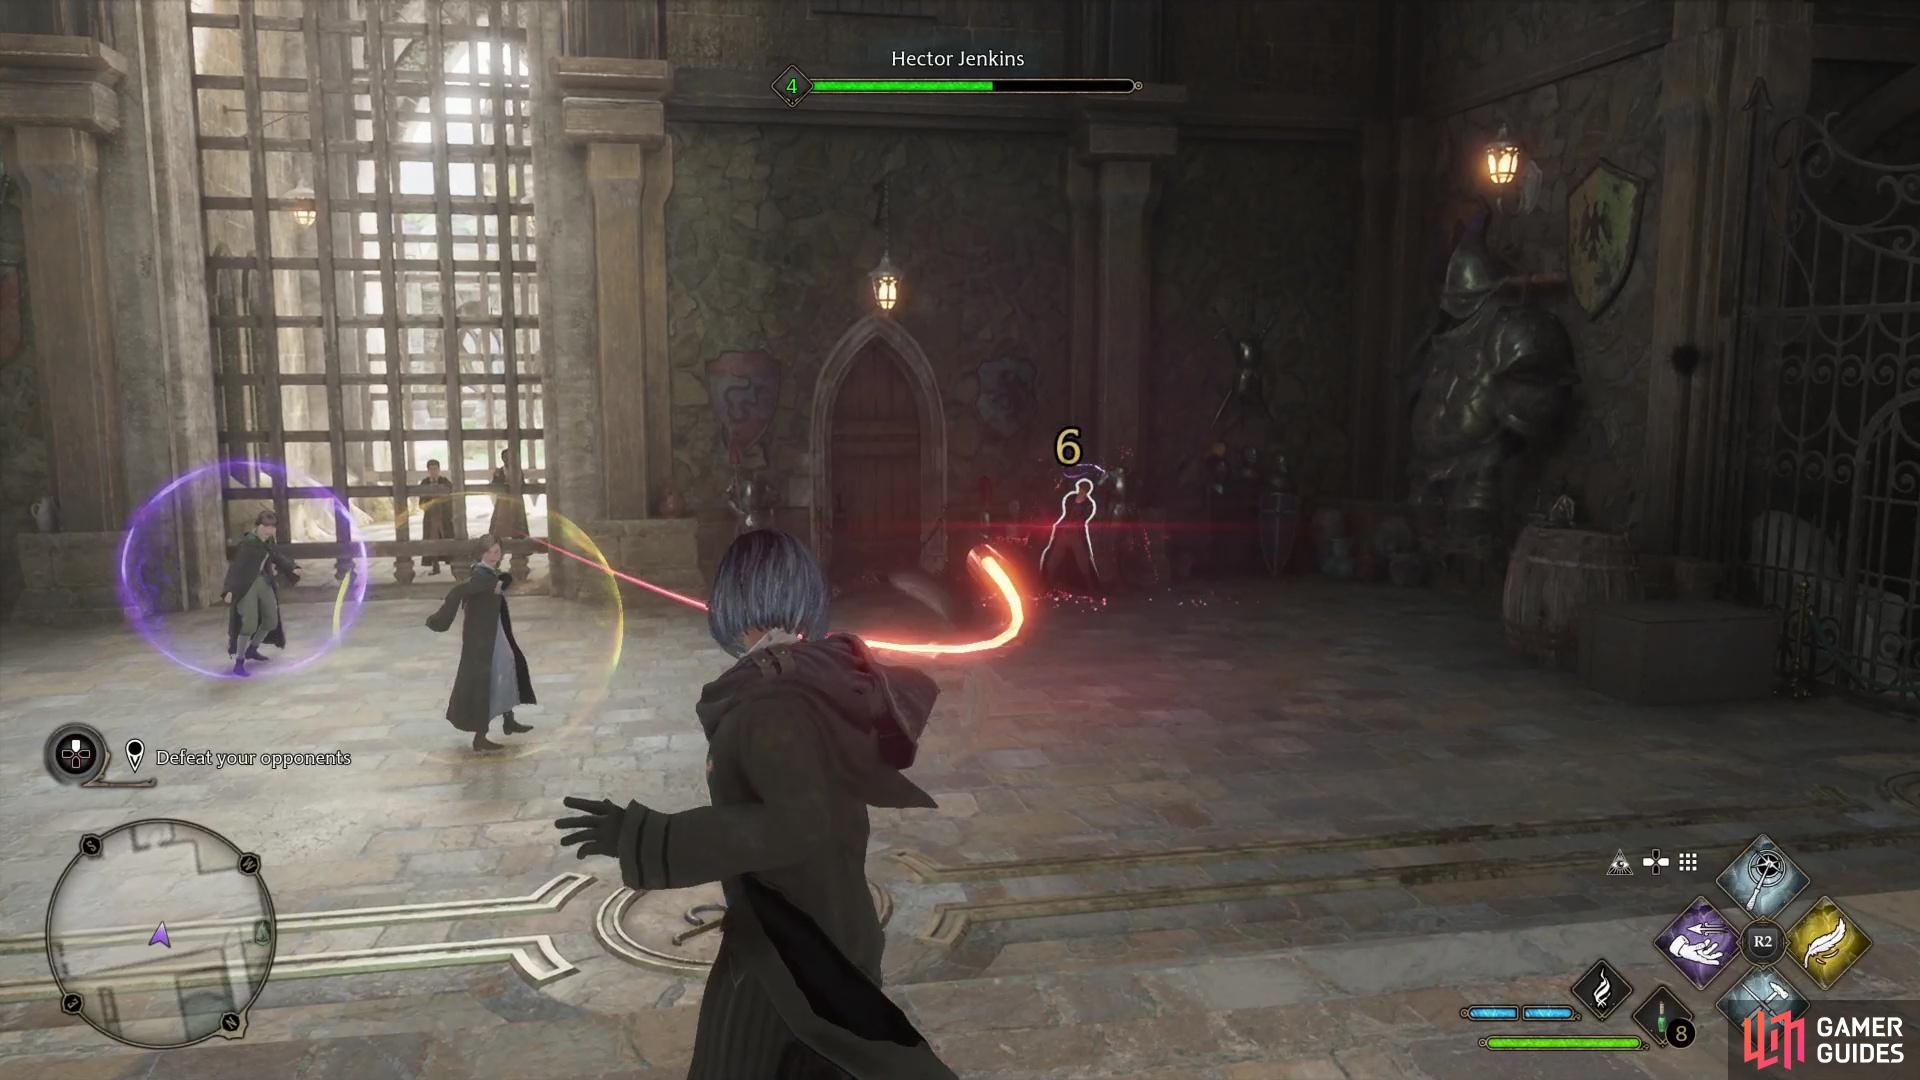 Stupefy also works in a pinch. Either way, once an enemy is exposed, punish them with wand attacks.